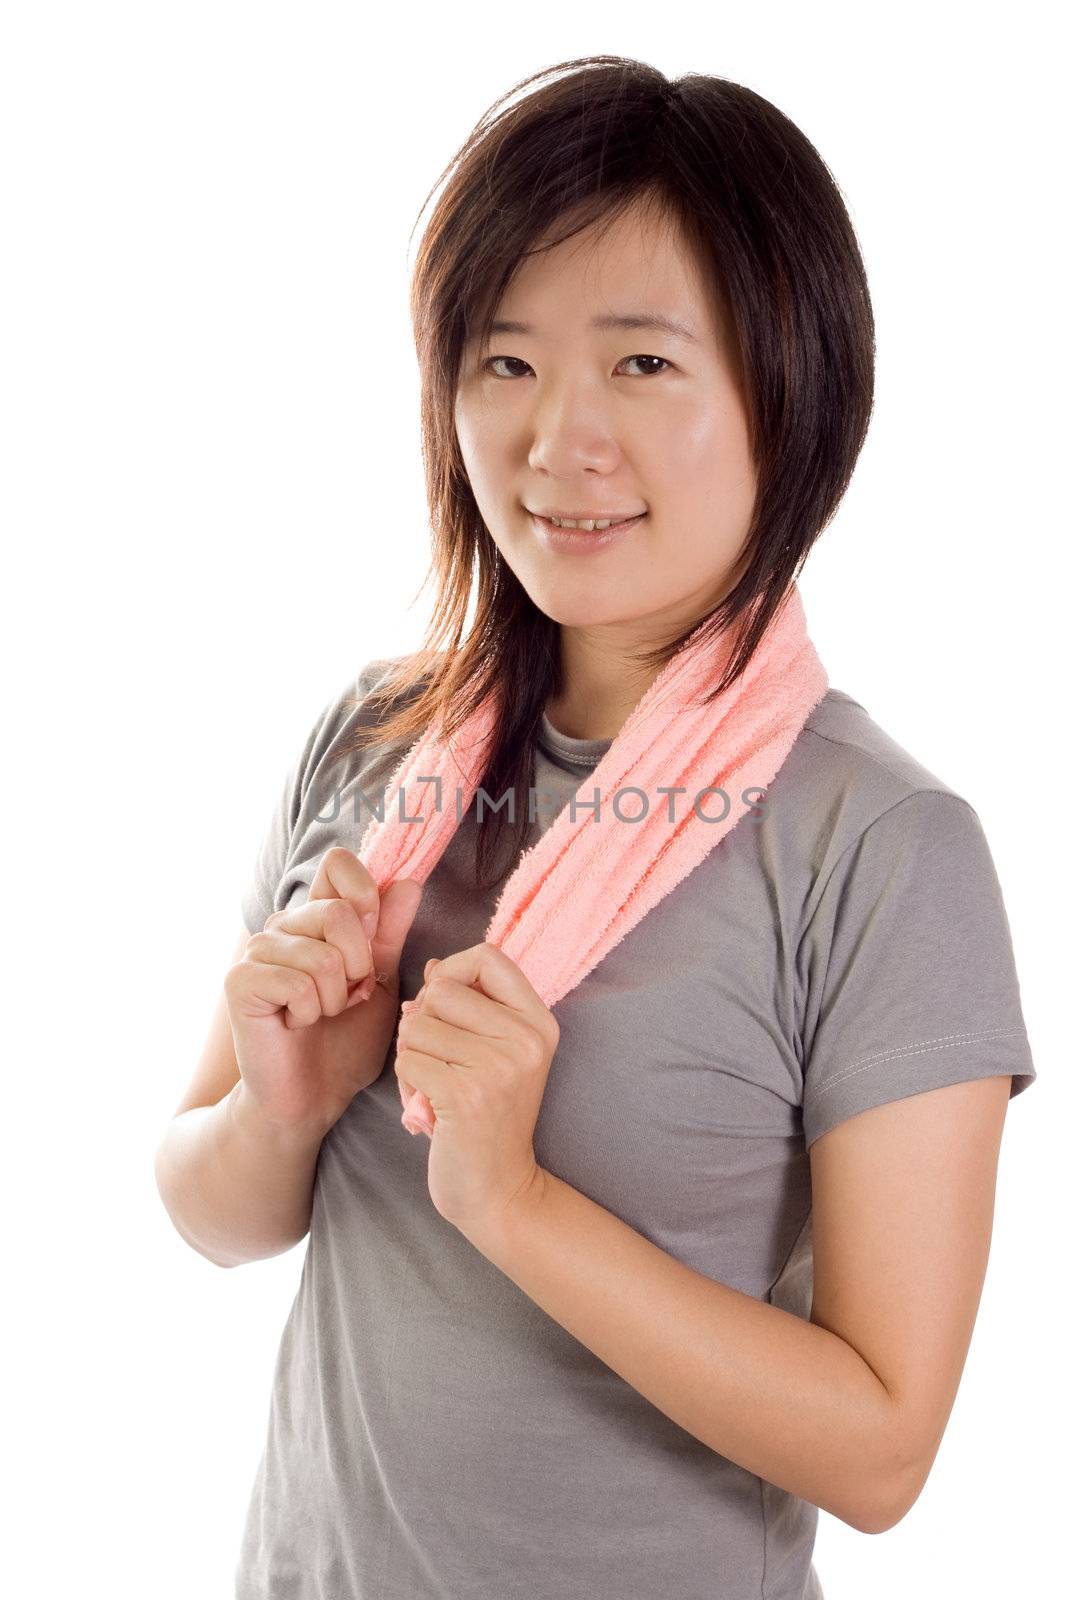 Sport woman with towel after excise on white background.